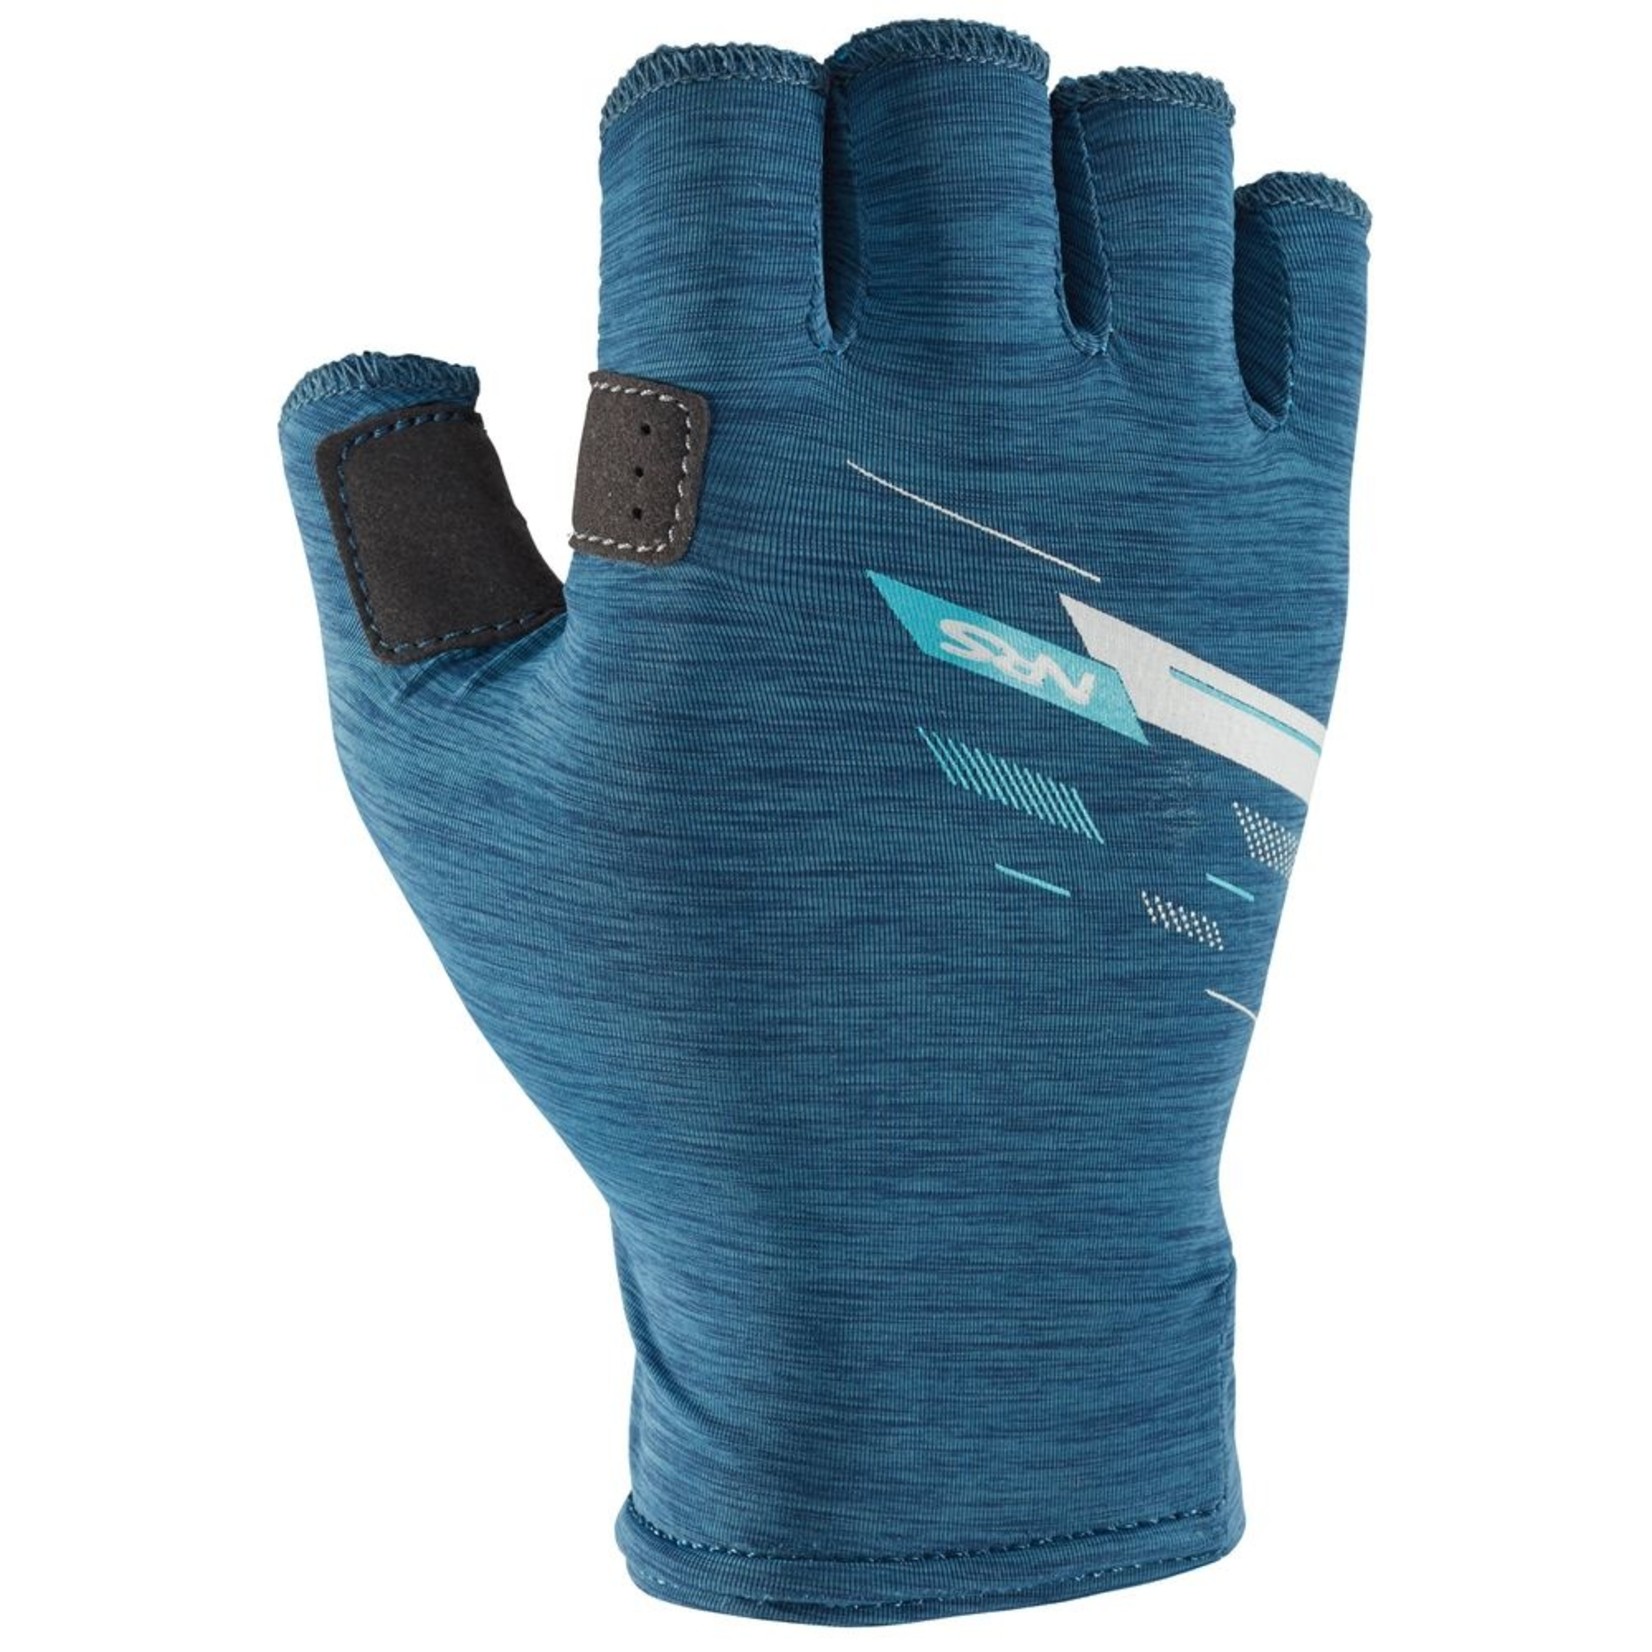 NRS NRS Men's Boater's Gloves XS **Closeout**